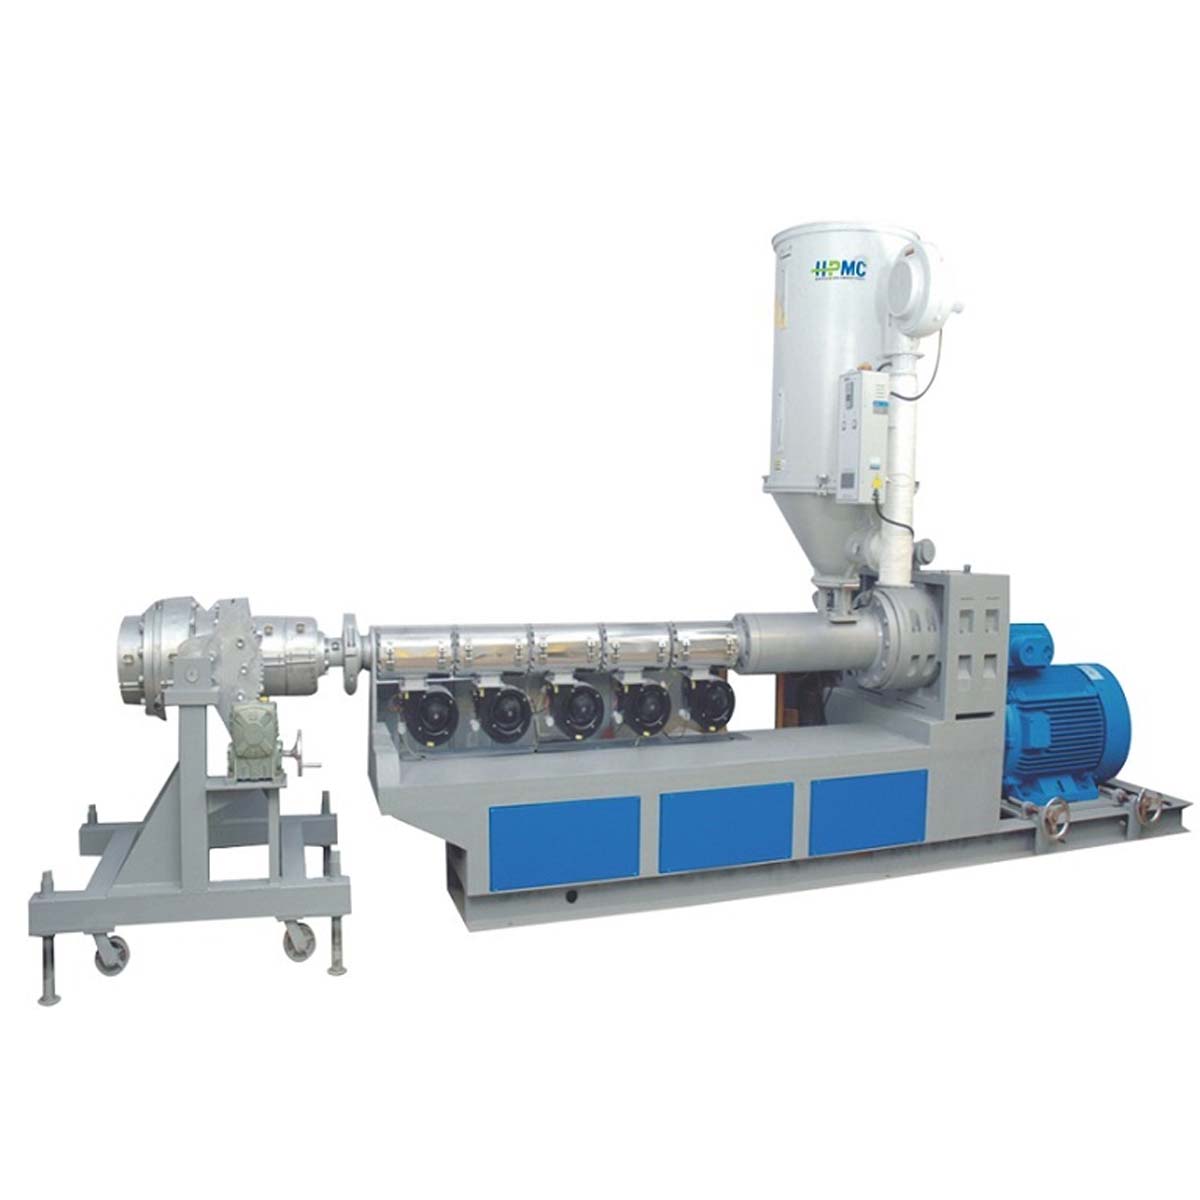 High Speed HDPE Pipe Extrusion Line Manufacturers, Suppliers and Exporters in Delhi